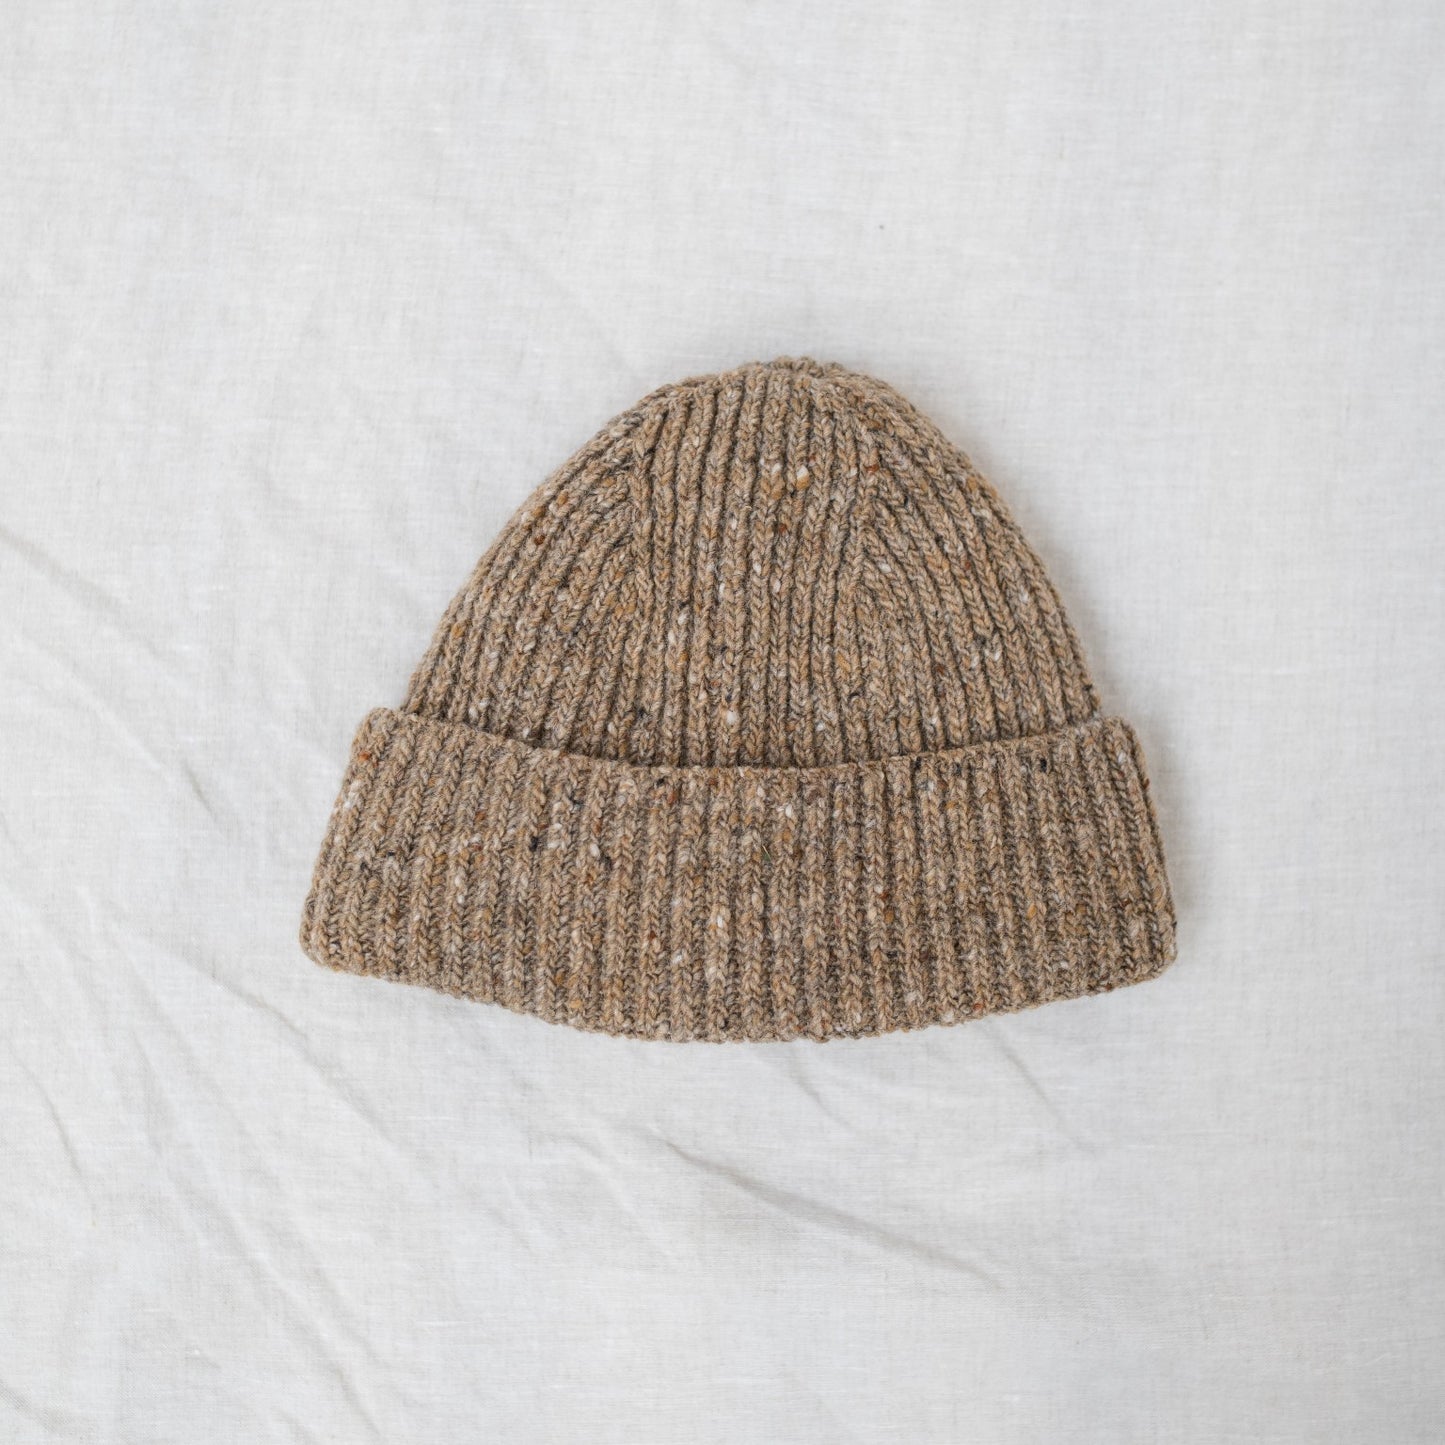 Donegal Merino Wool Beanie Hat in Biscuit